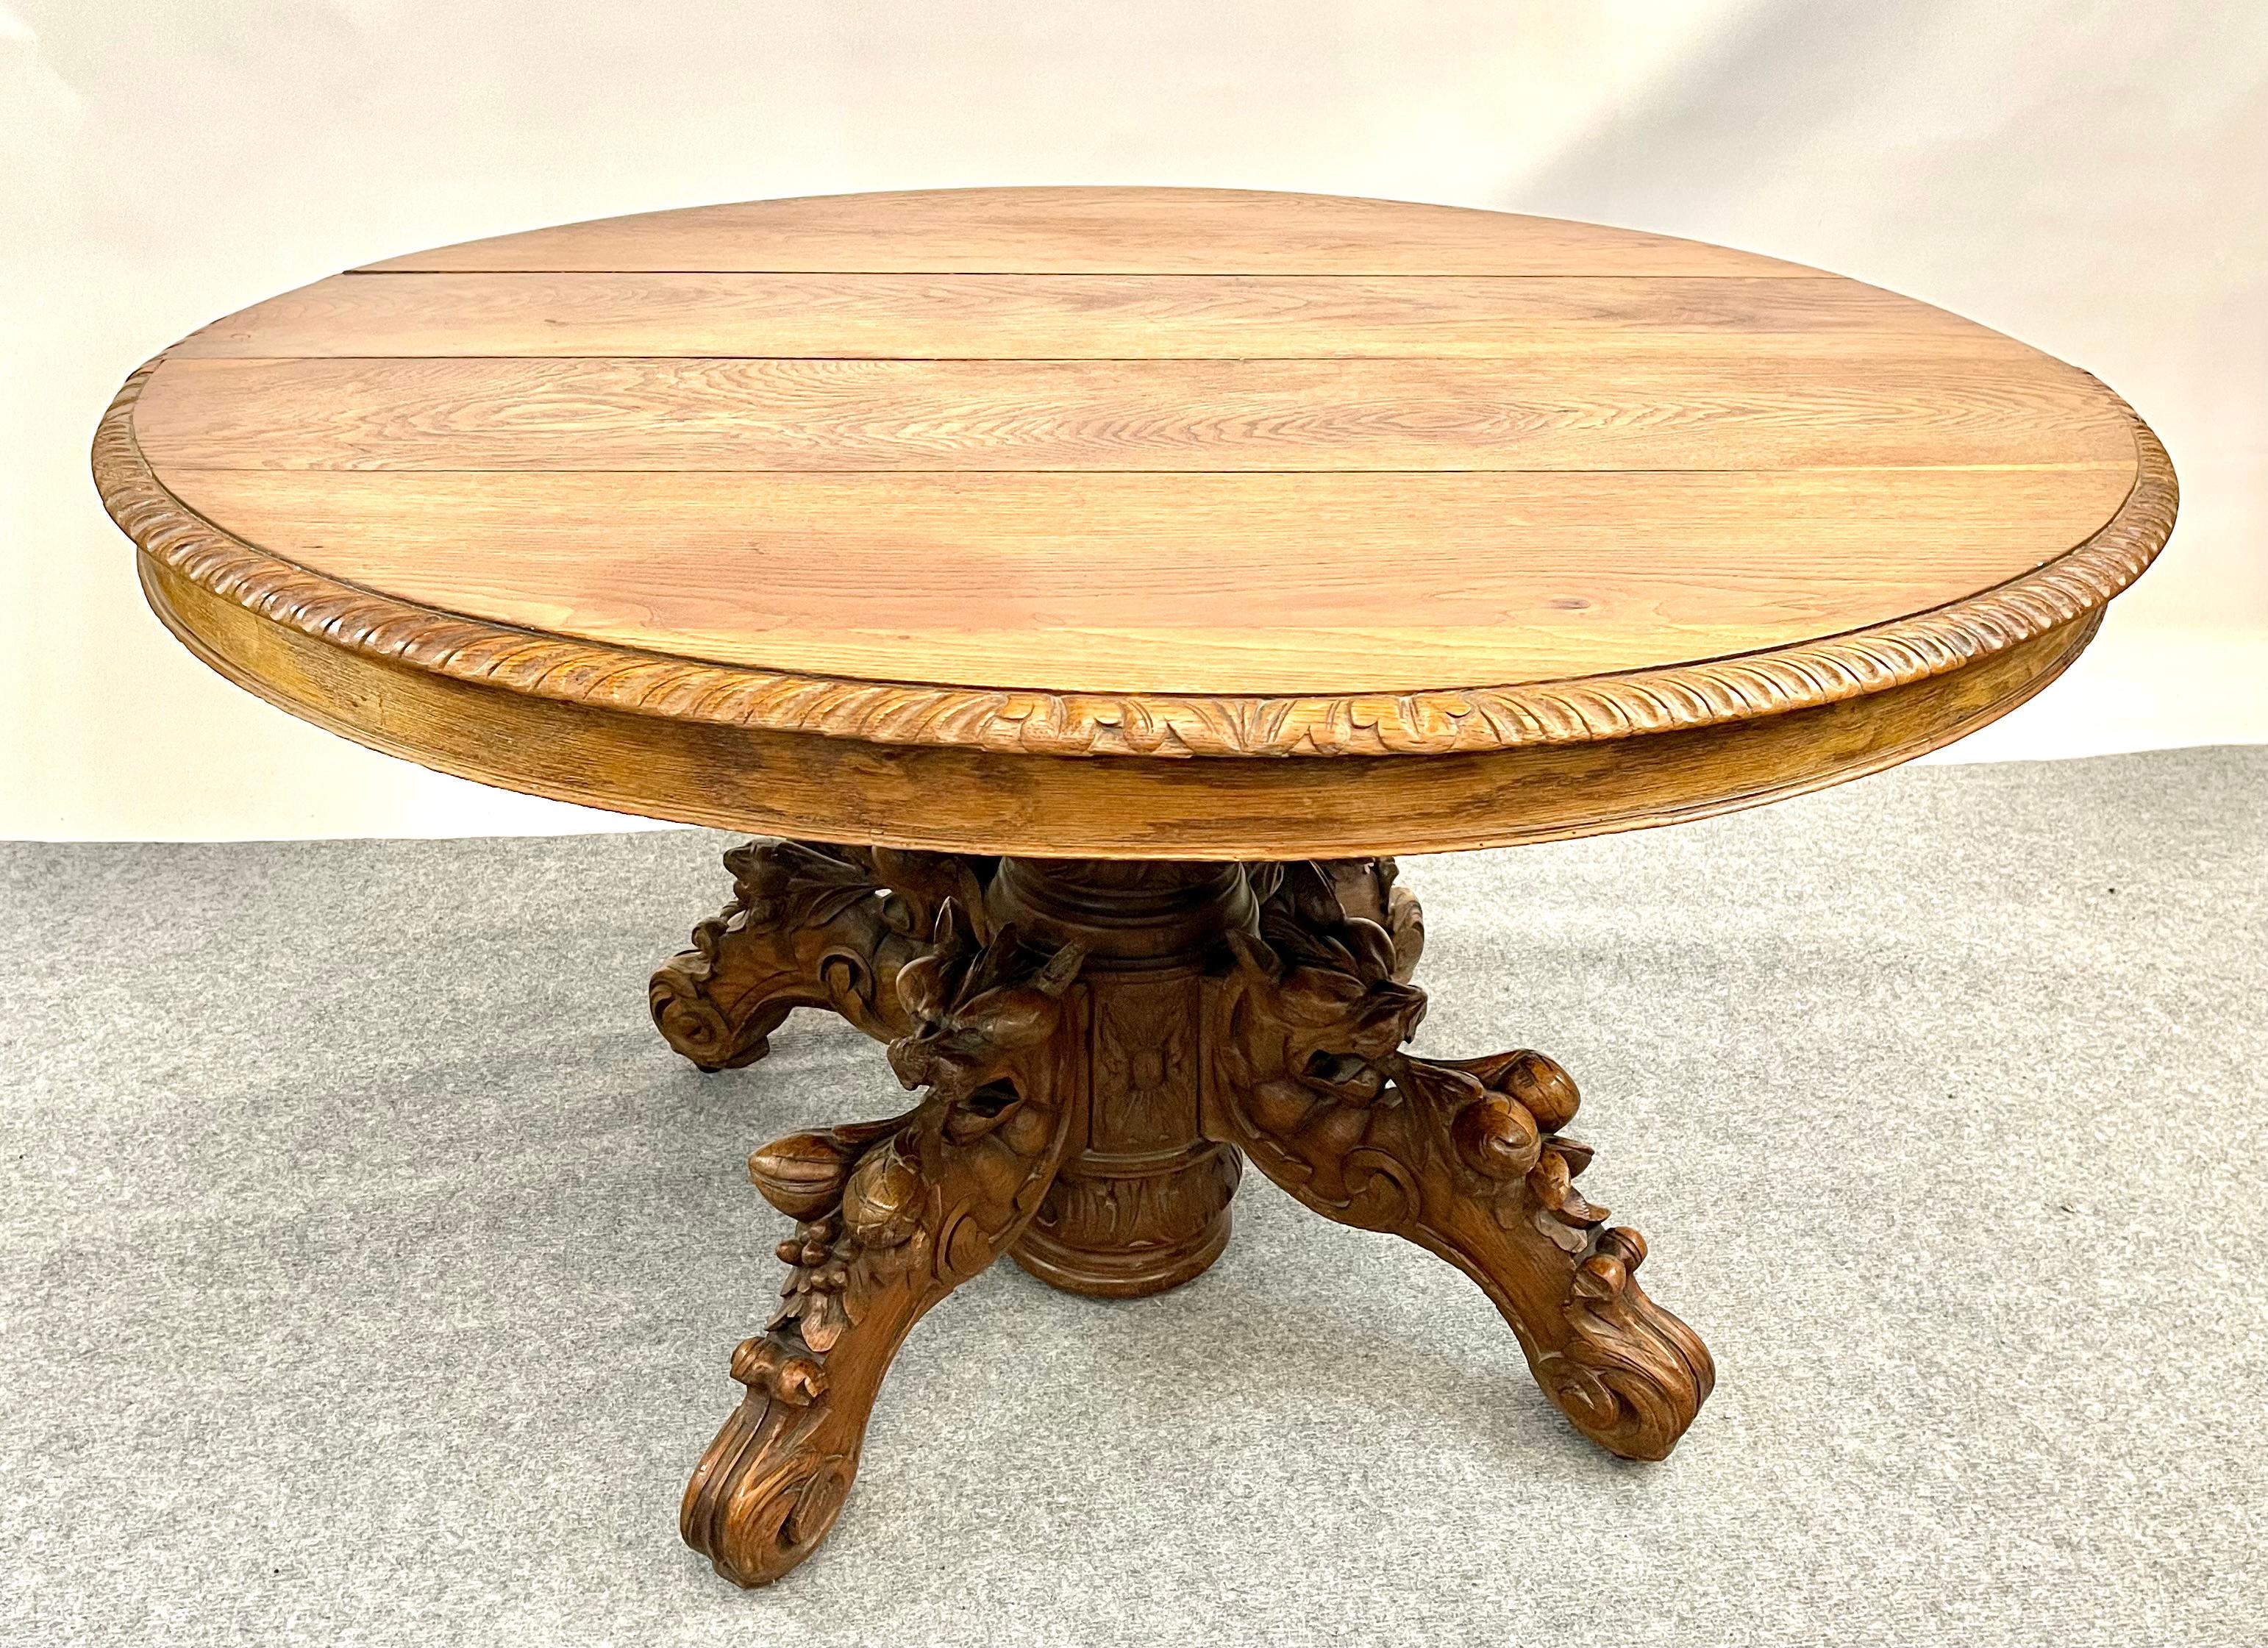 This classic hunting or Black Forest dining table is from France and dates to the late 1800's. 

This one is unusually nice with intricate carvings on the feet. The table is made from solid and veneered oak finished to a warm dark color. It is in